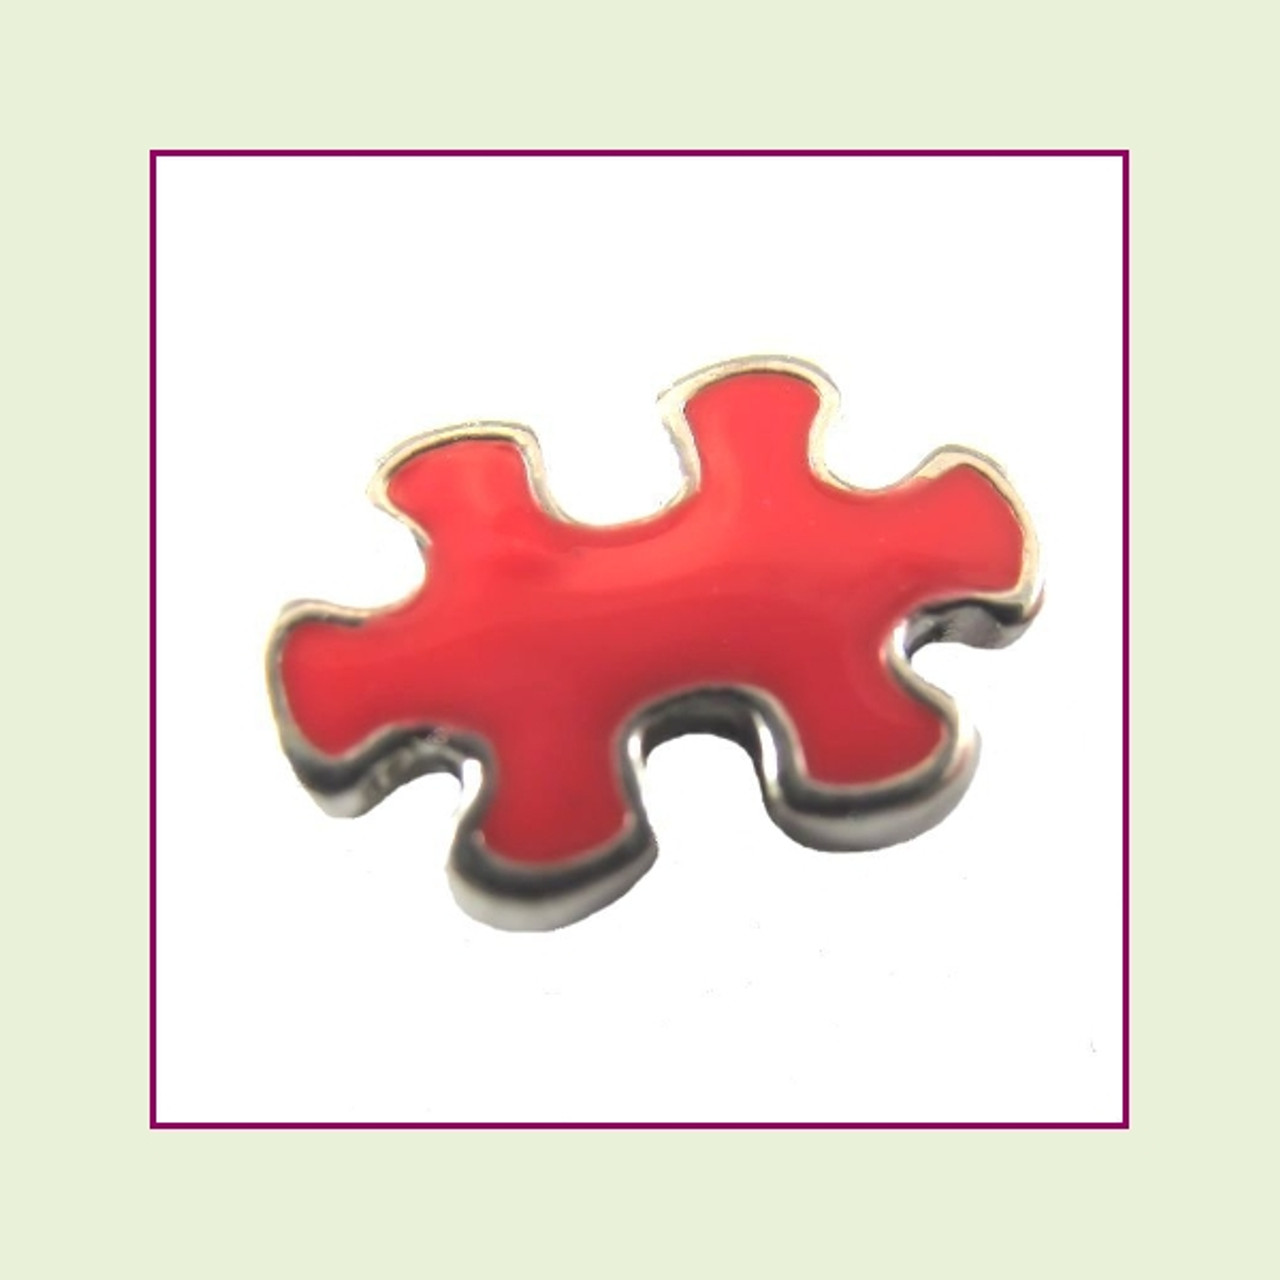 Puzzle Piece (Silver Base) Floating Charm